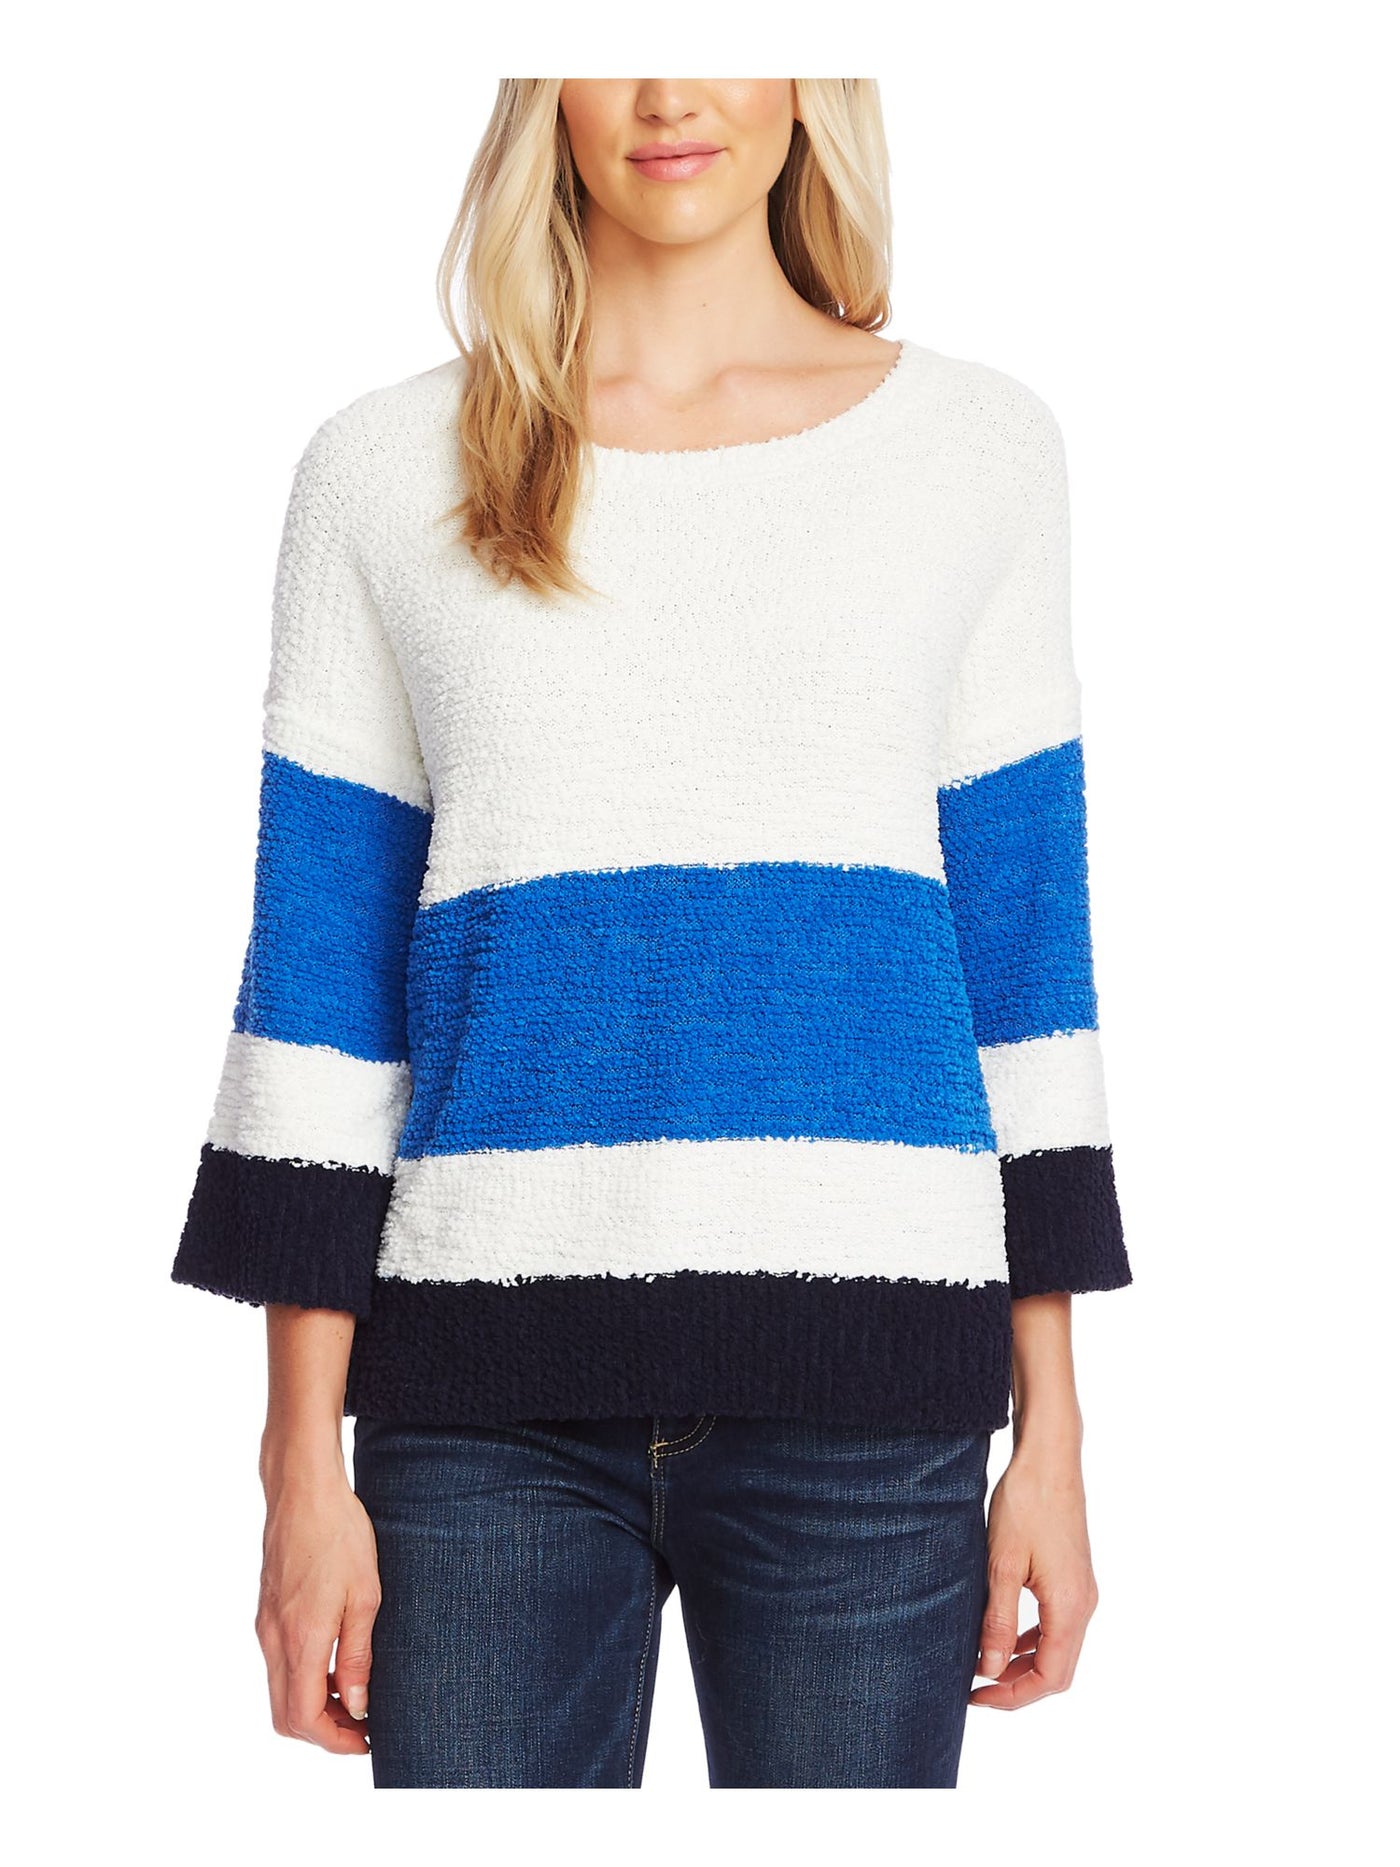 VINCE CAMUTO Womens White Color Block 3/4 Sleeve Jewel Neck Sweater XS